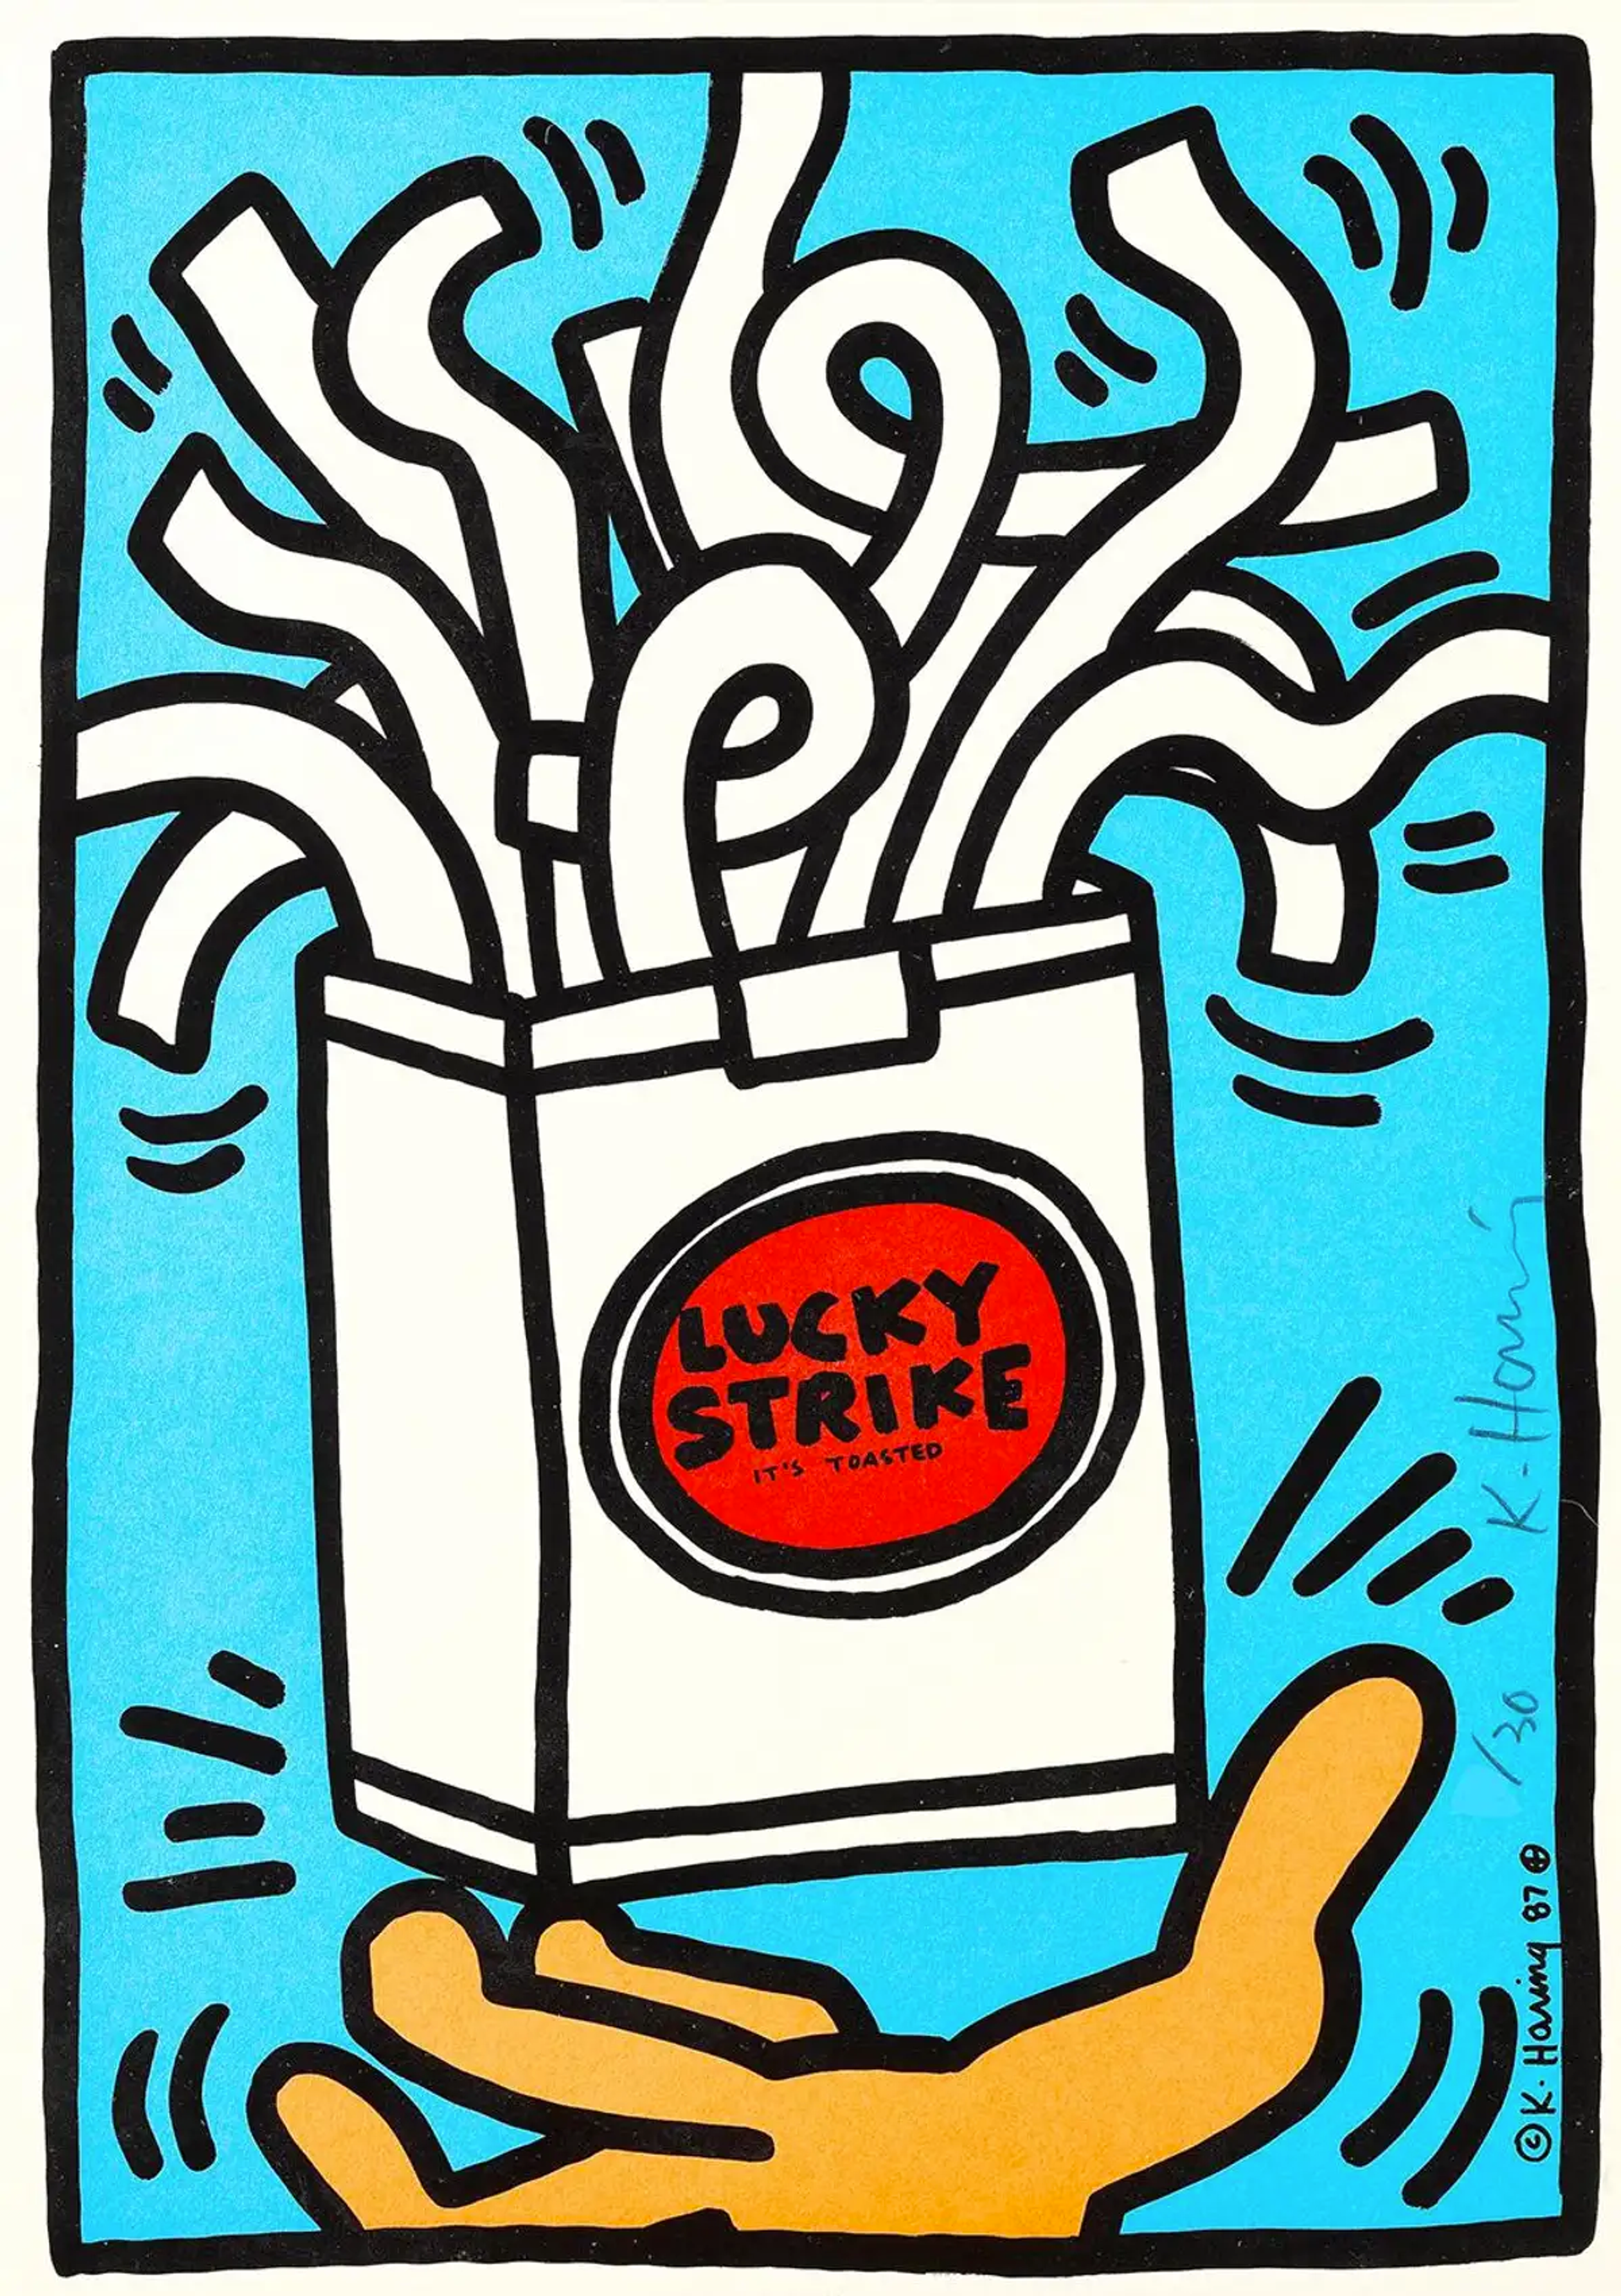 The print depicts the Lucky Strike packaging with cigarettes protruding from the box in swirling shapes. A hand rendered in orange touches the box on the edges, holding it from the bottom. The drawing is sketched in bold black lines.